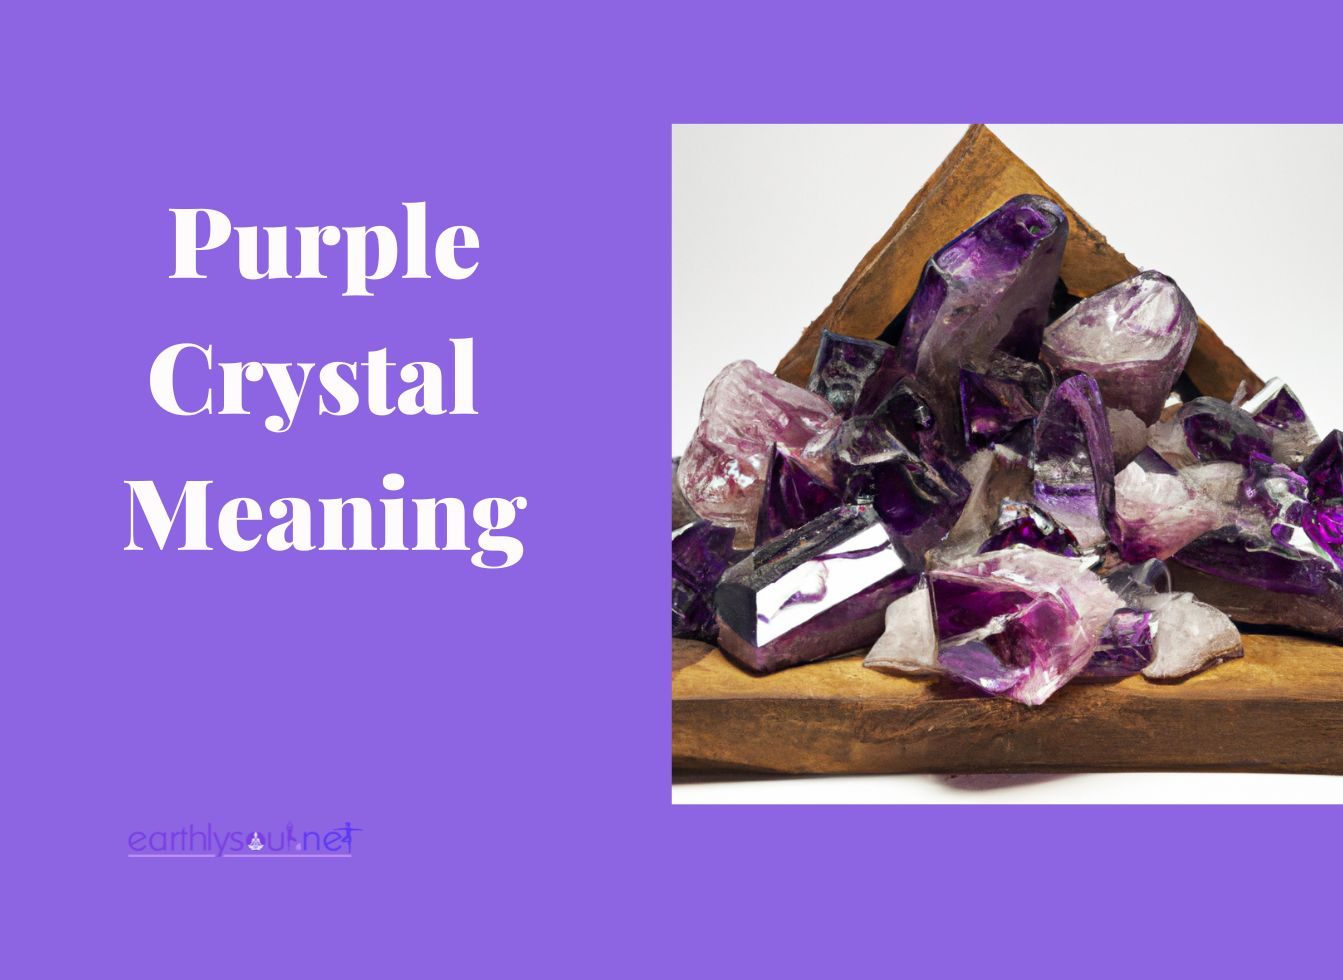 Purple crystal meaning featured image